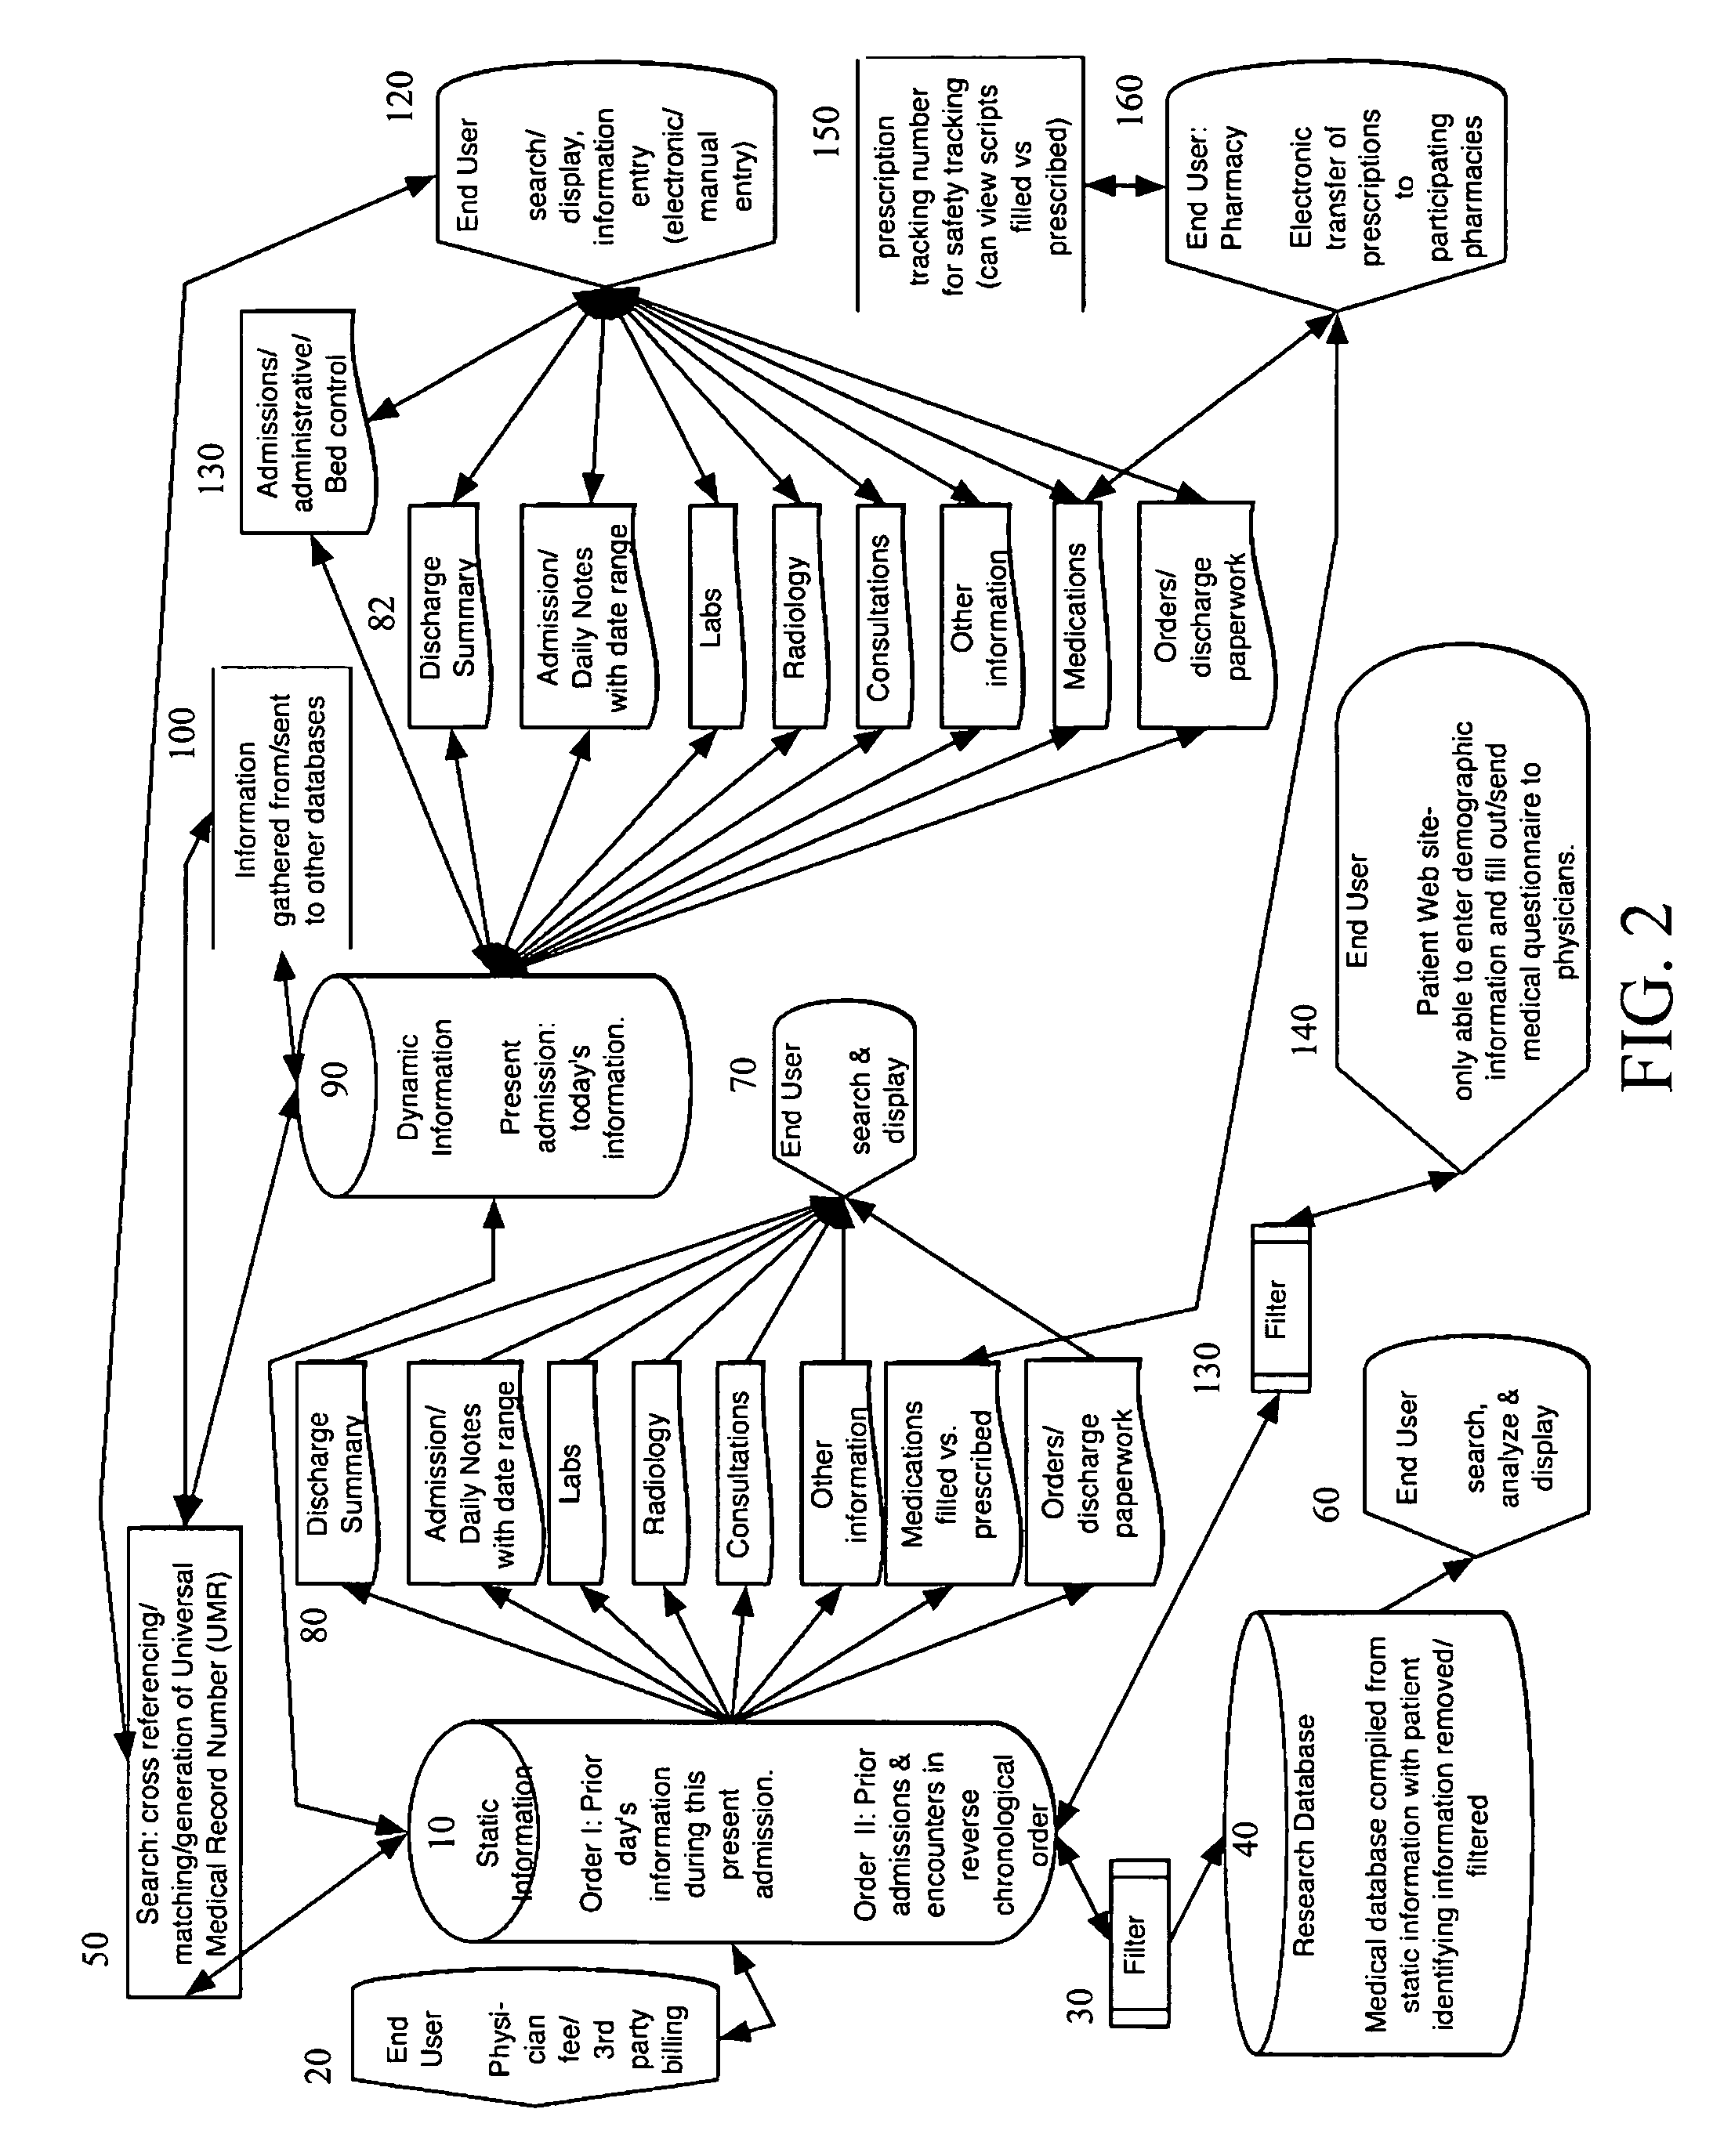 Method for horizontal integration and research of information of medical records utilizing HIPPA compliant internet protocols, workflow management and static/dynamic processing of information